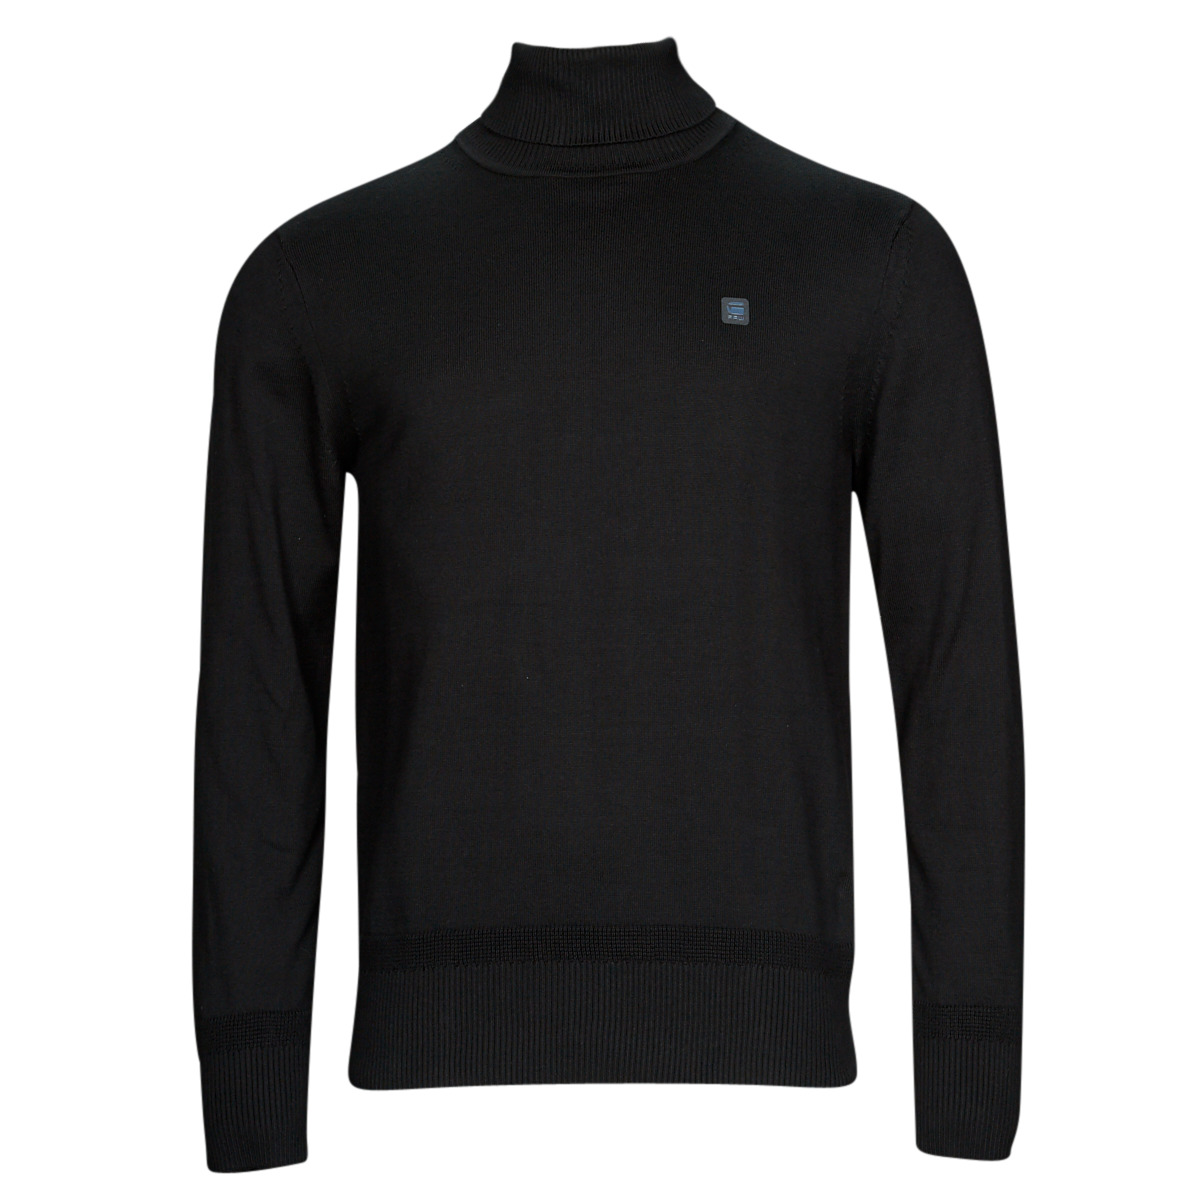 G-Star Raw Premium core turtle knit Black - Free delivery | Spartoo NET ! -  Clothing jumpers Men